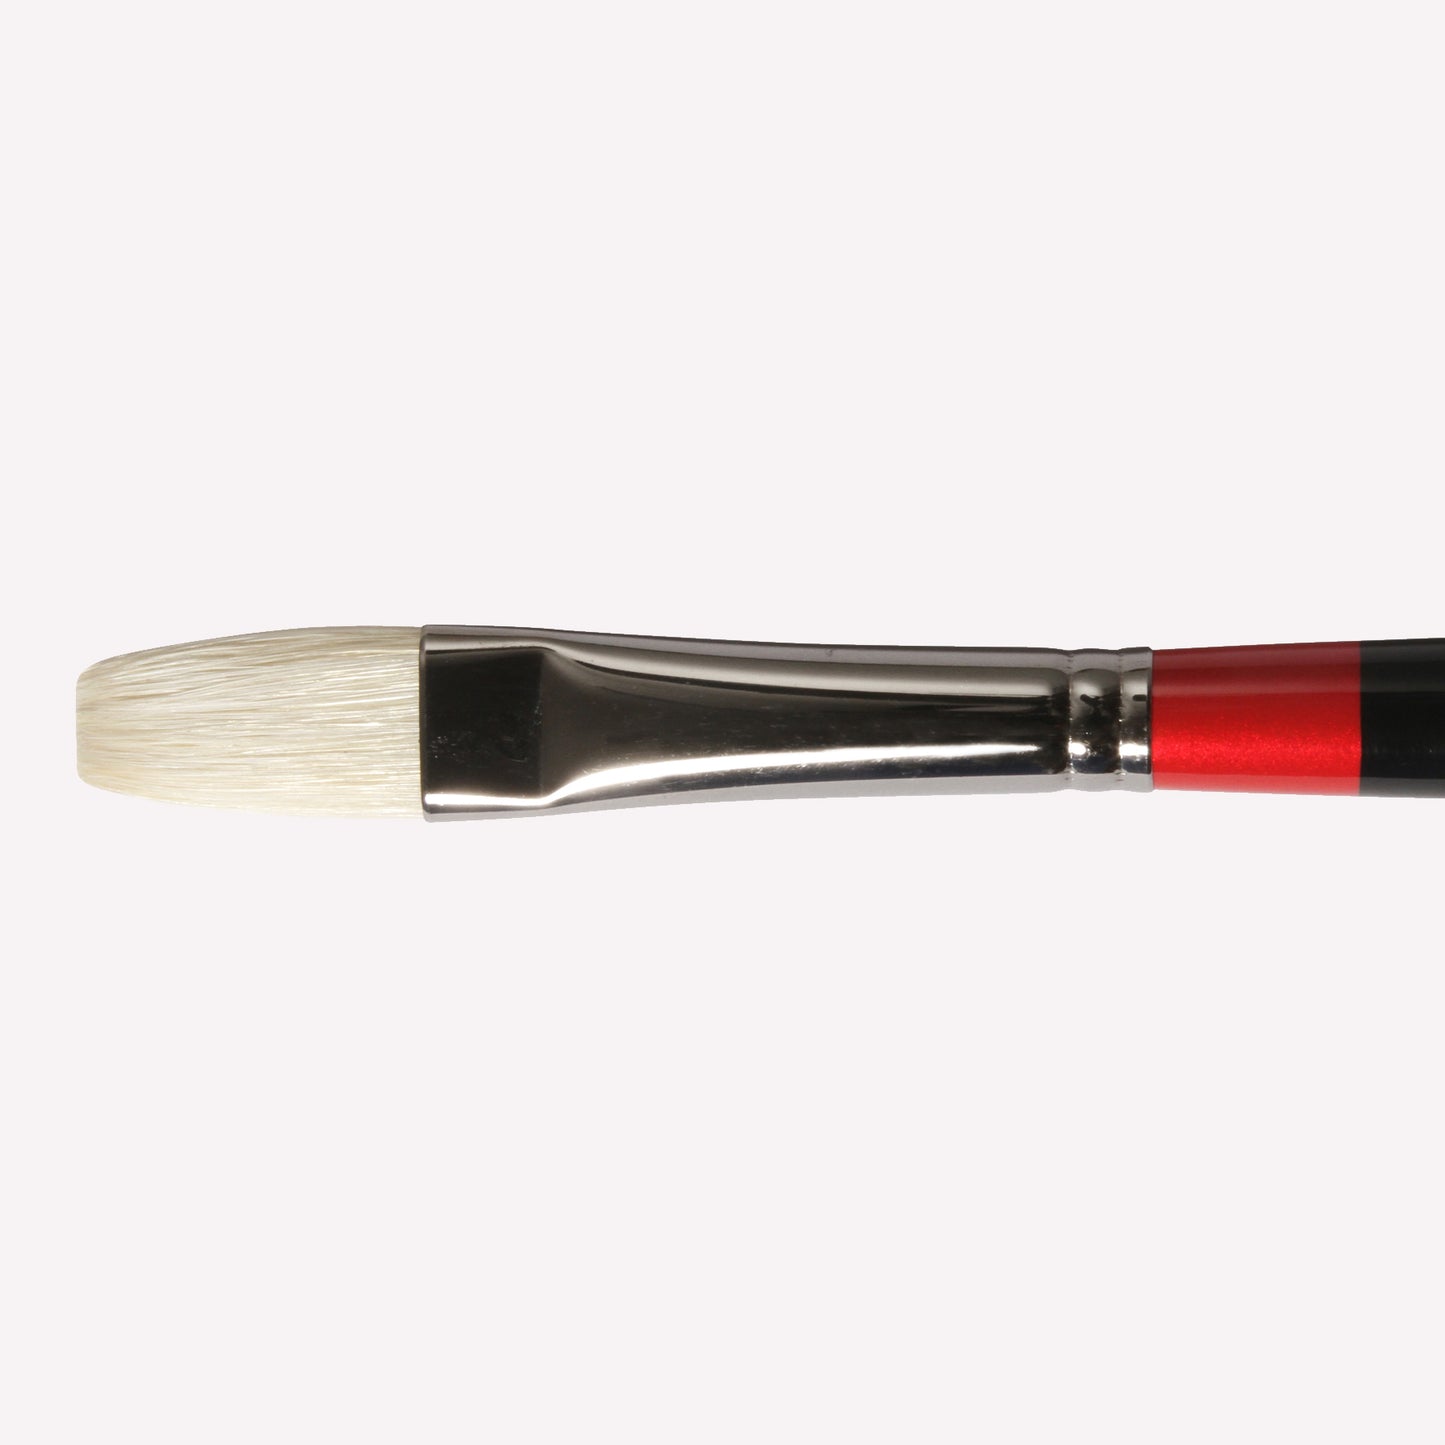 Daler-Rowney Georgian long flat paintbrush in size G48-10 . Brushes have a classy black handle with red detailing and a silver ferrule. 